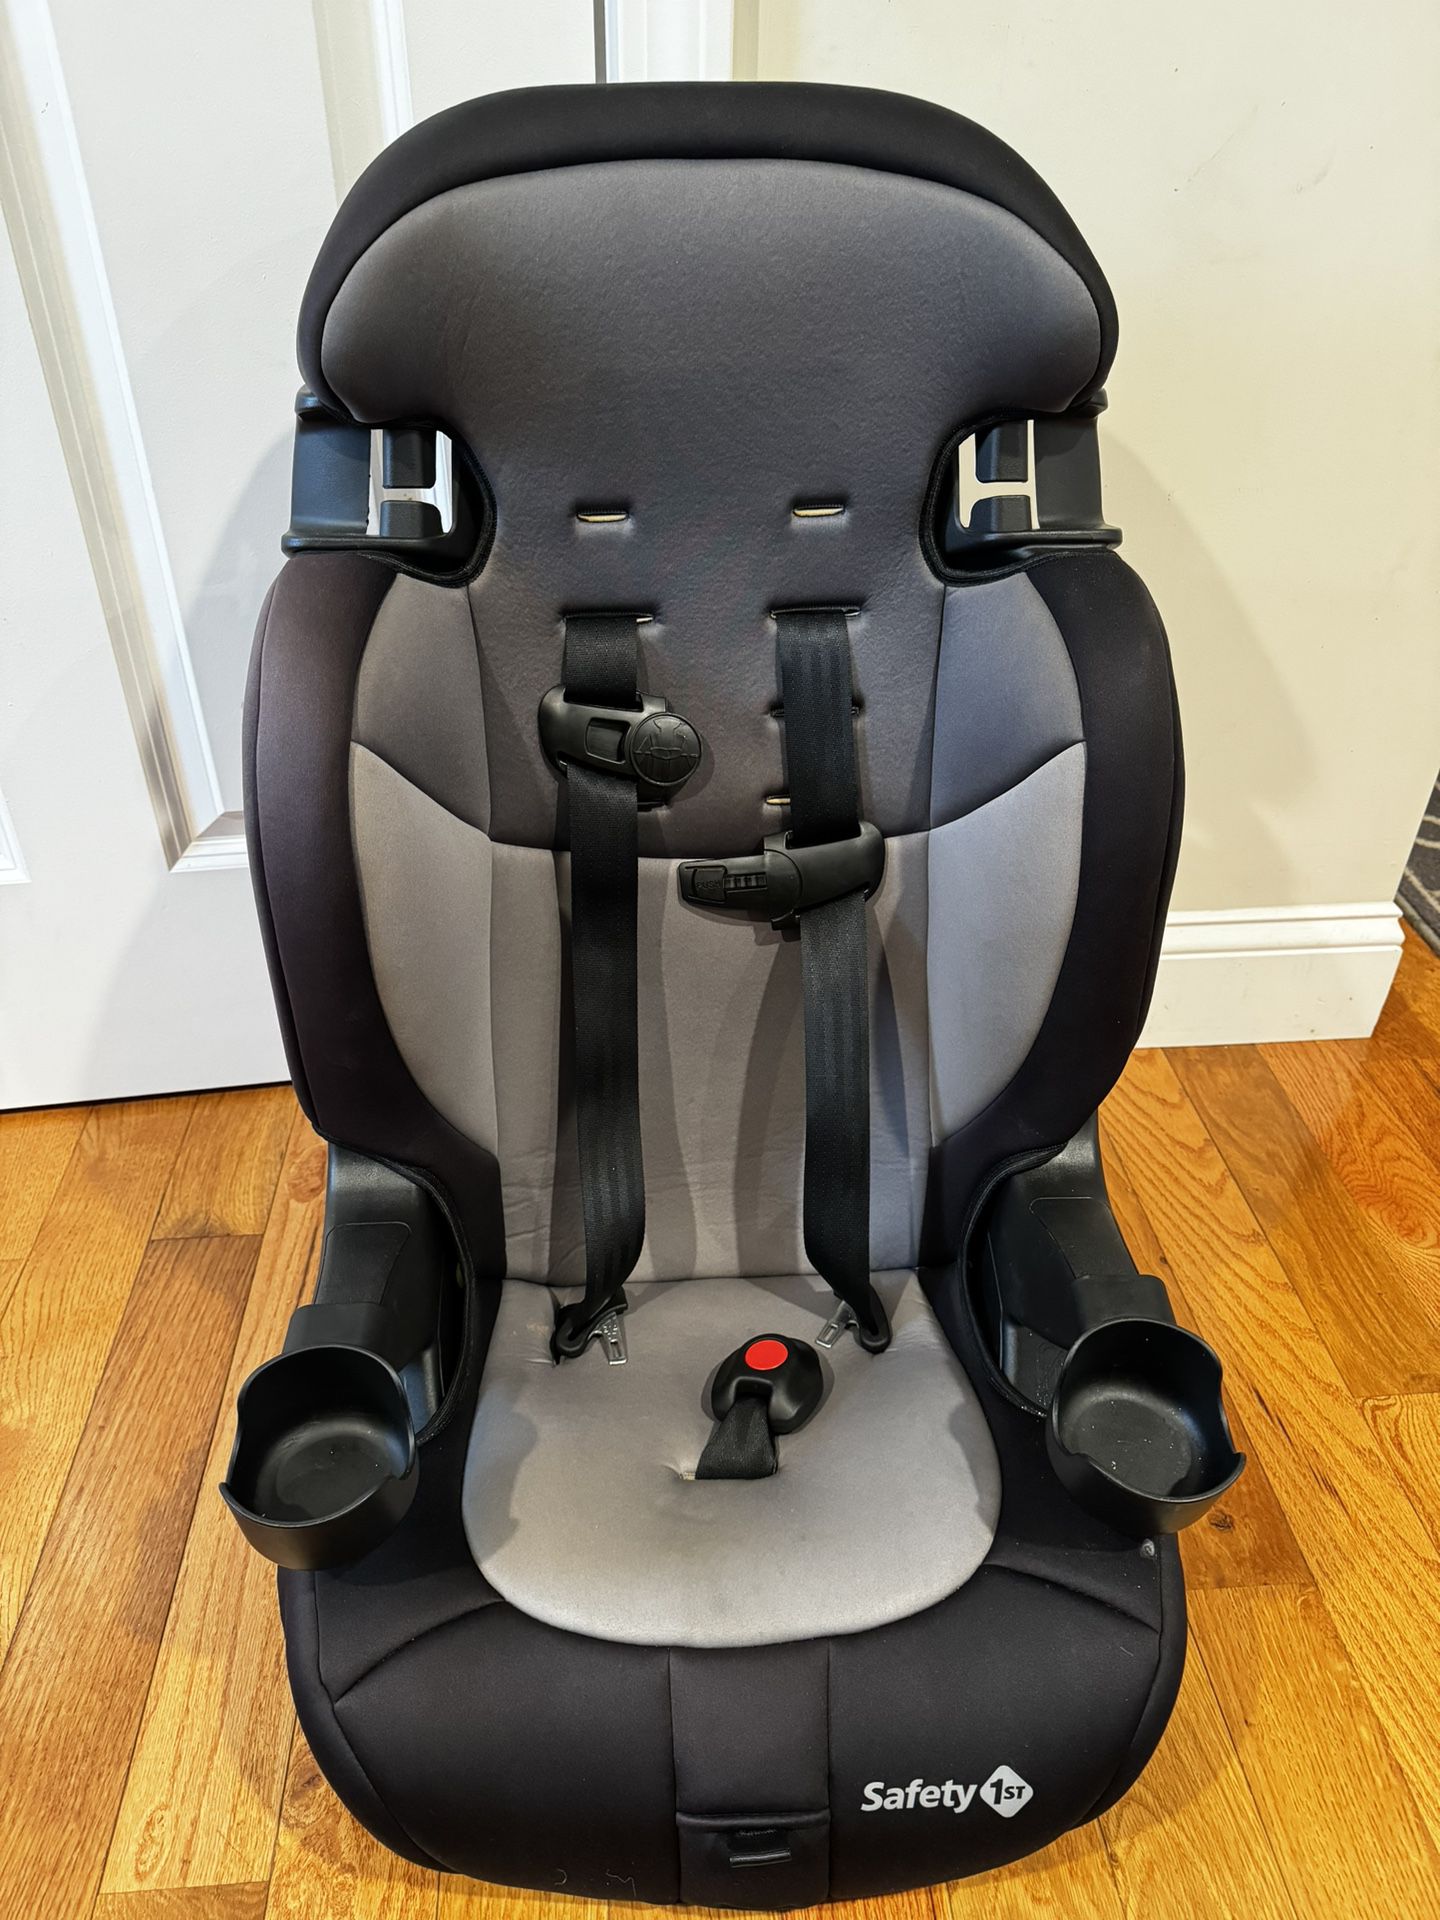 Safety 1st Grand DLX Booster Car Seat